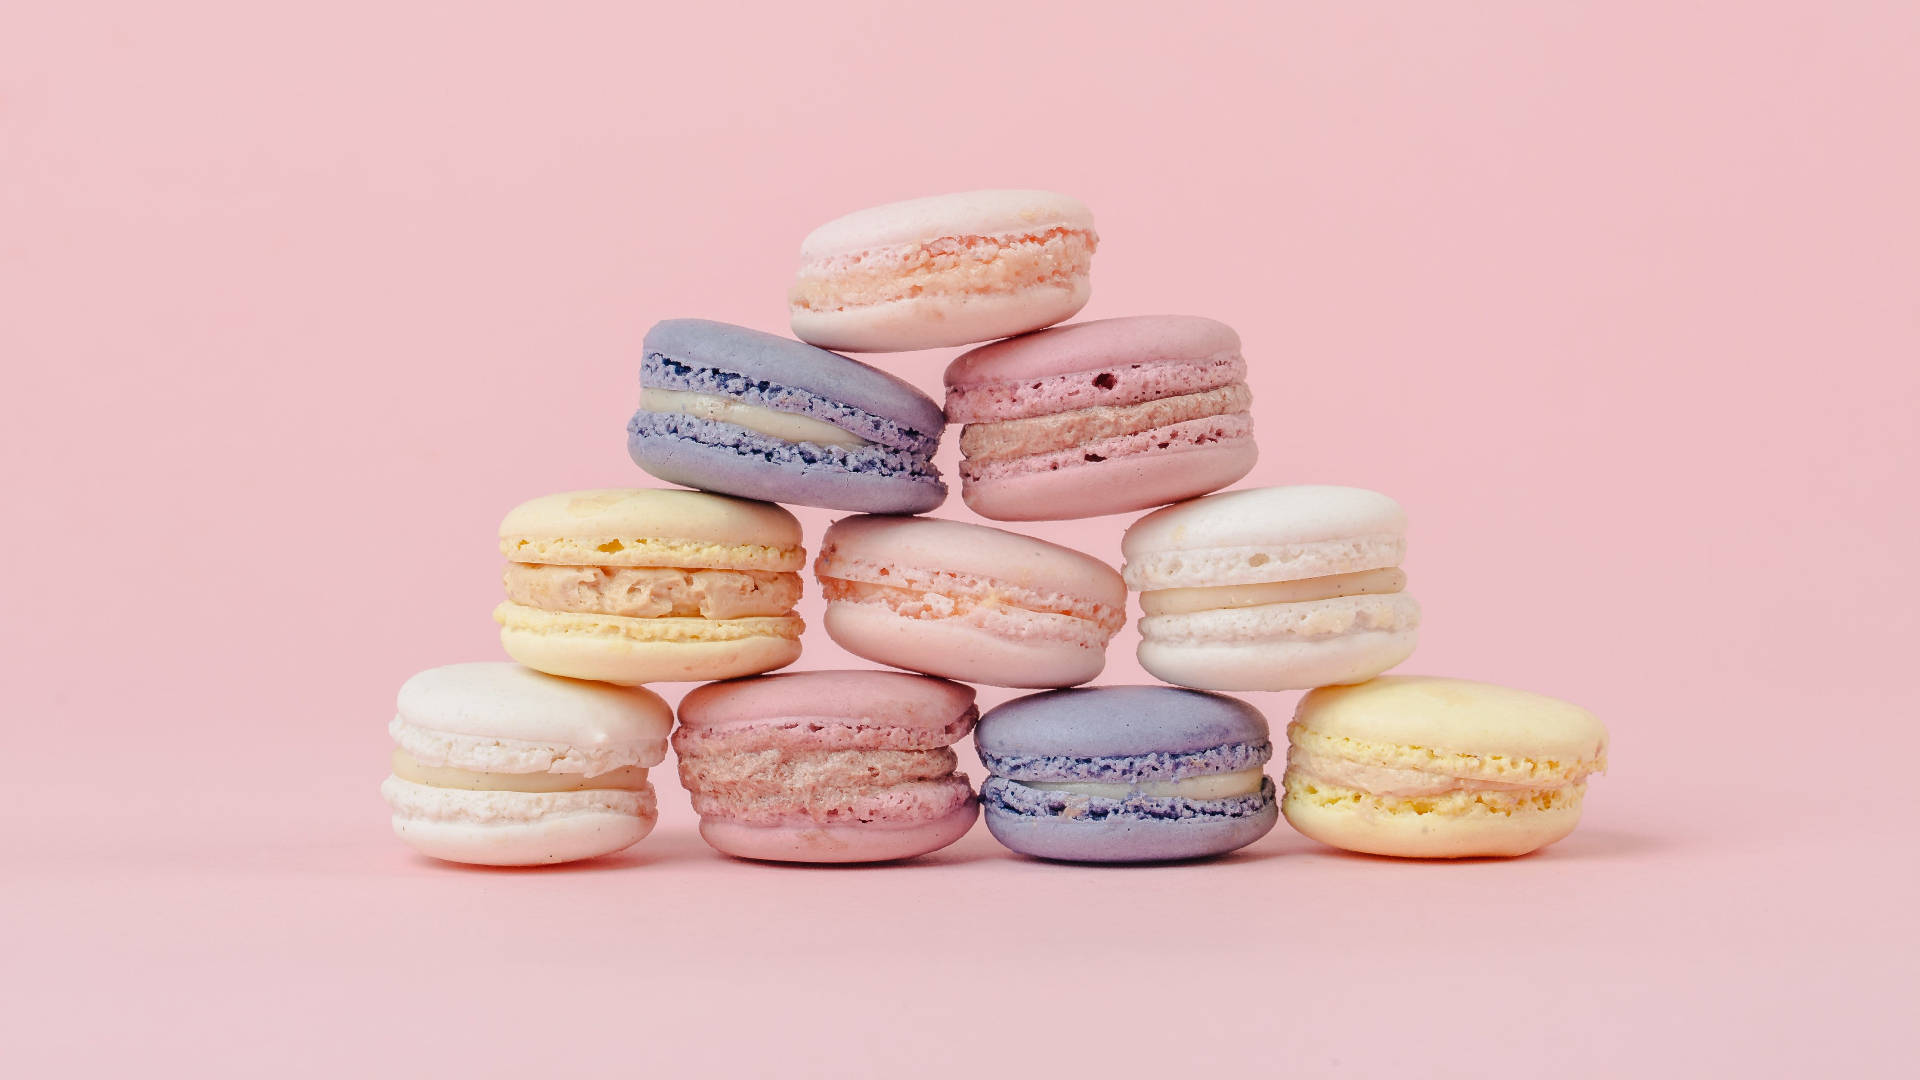 Deliciously Soft & Sweet Pastel Macaroon Pyramids Wallpaper